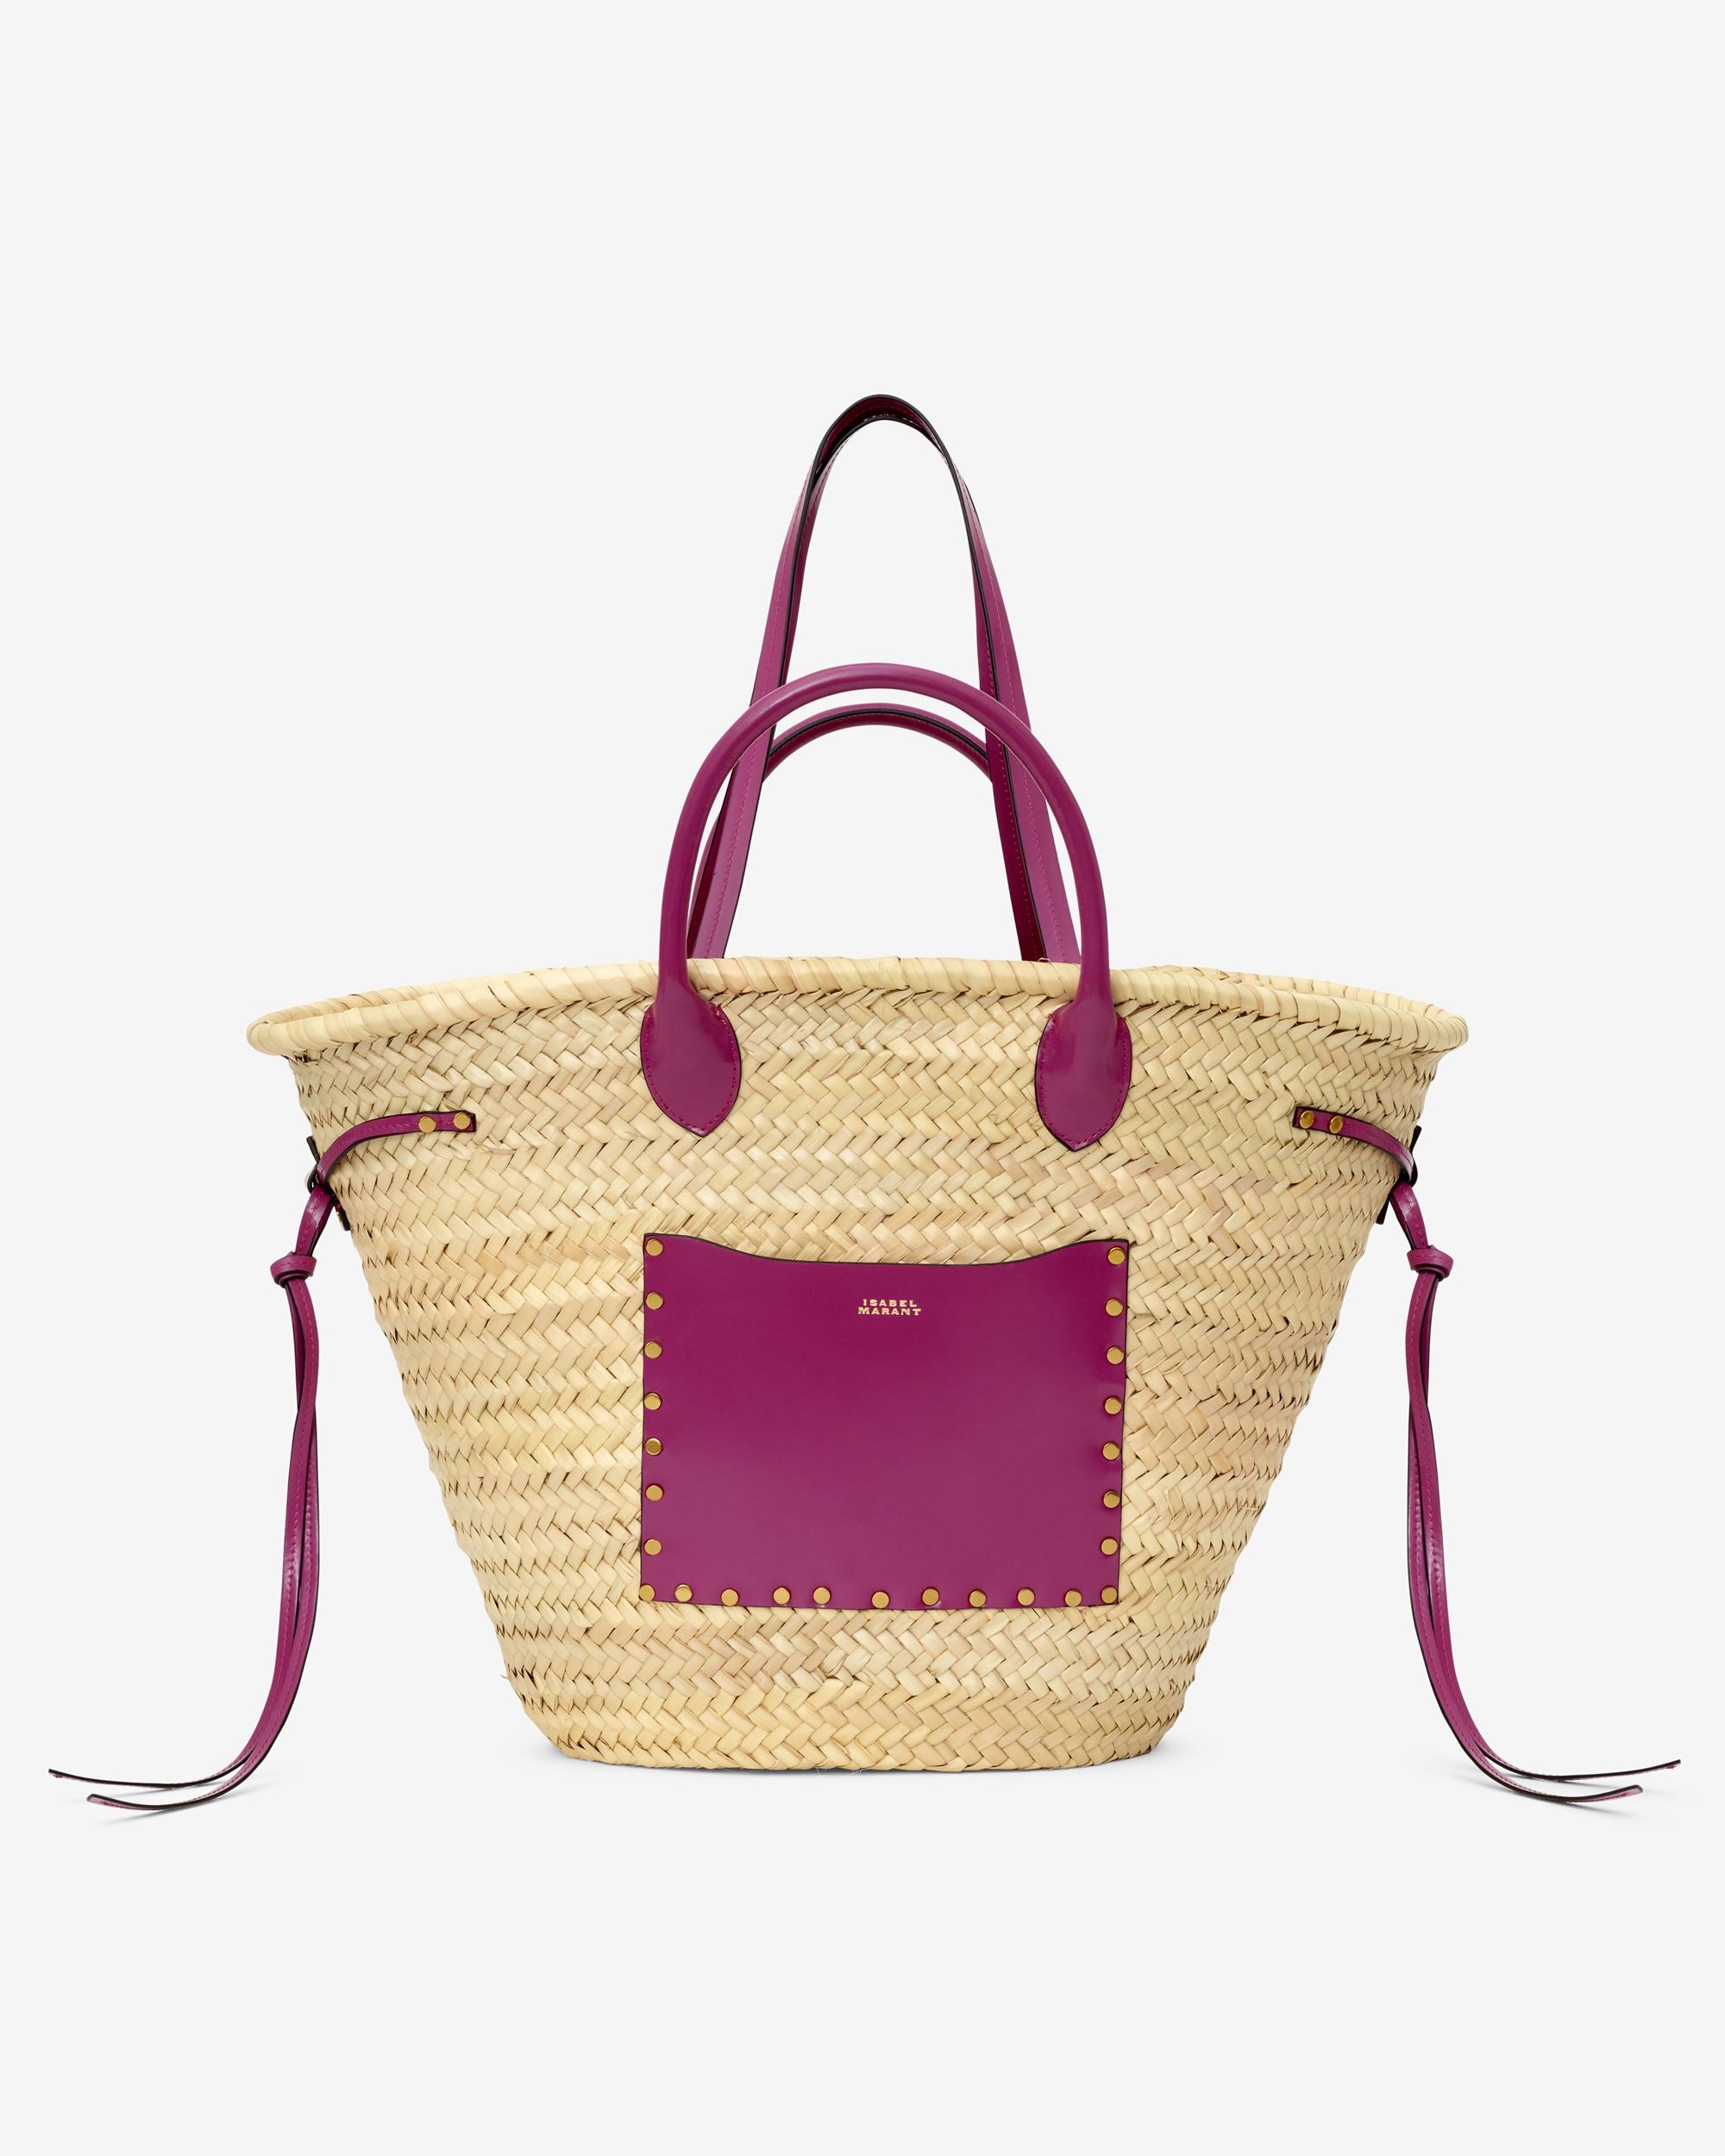 ISABEL MARANT - Cadix Straw & Leather Tote / Market / Beach Bag - Pink Leather